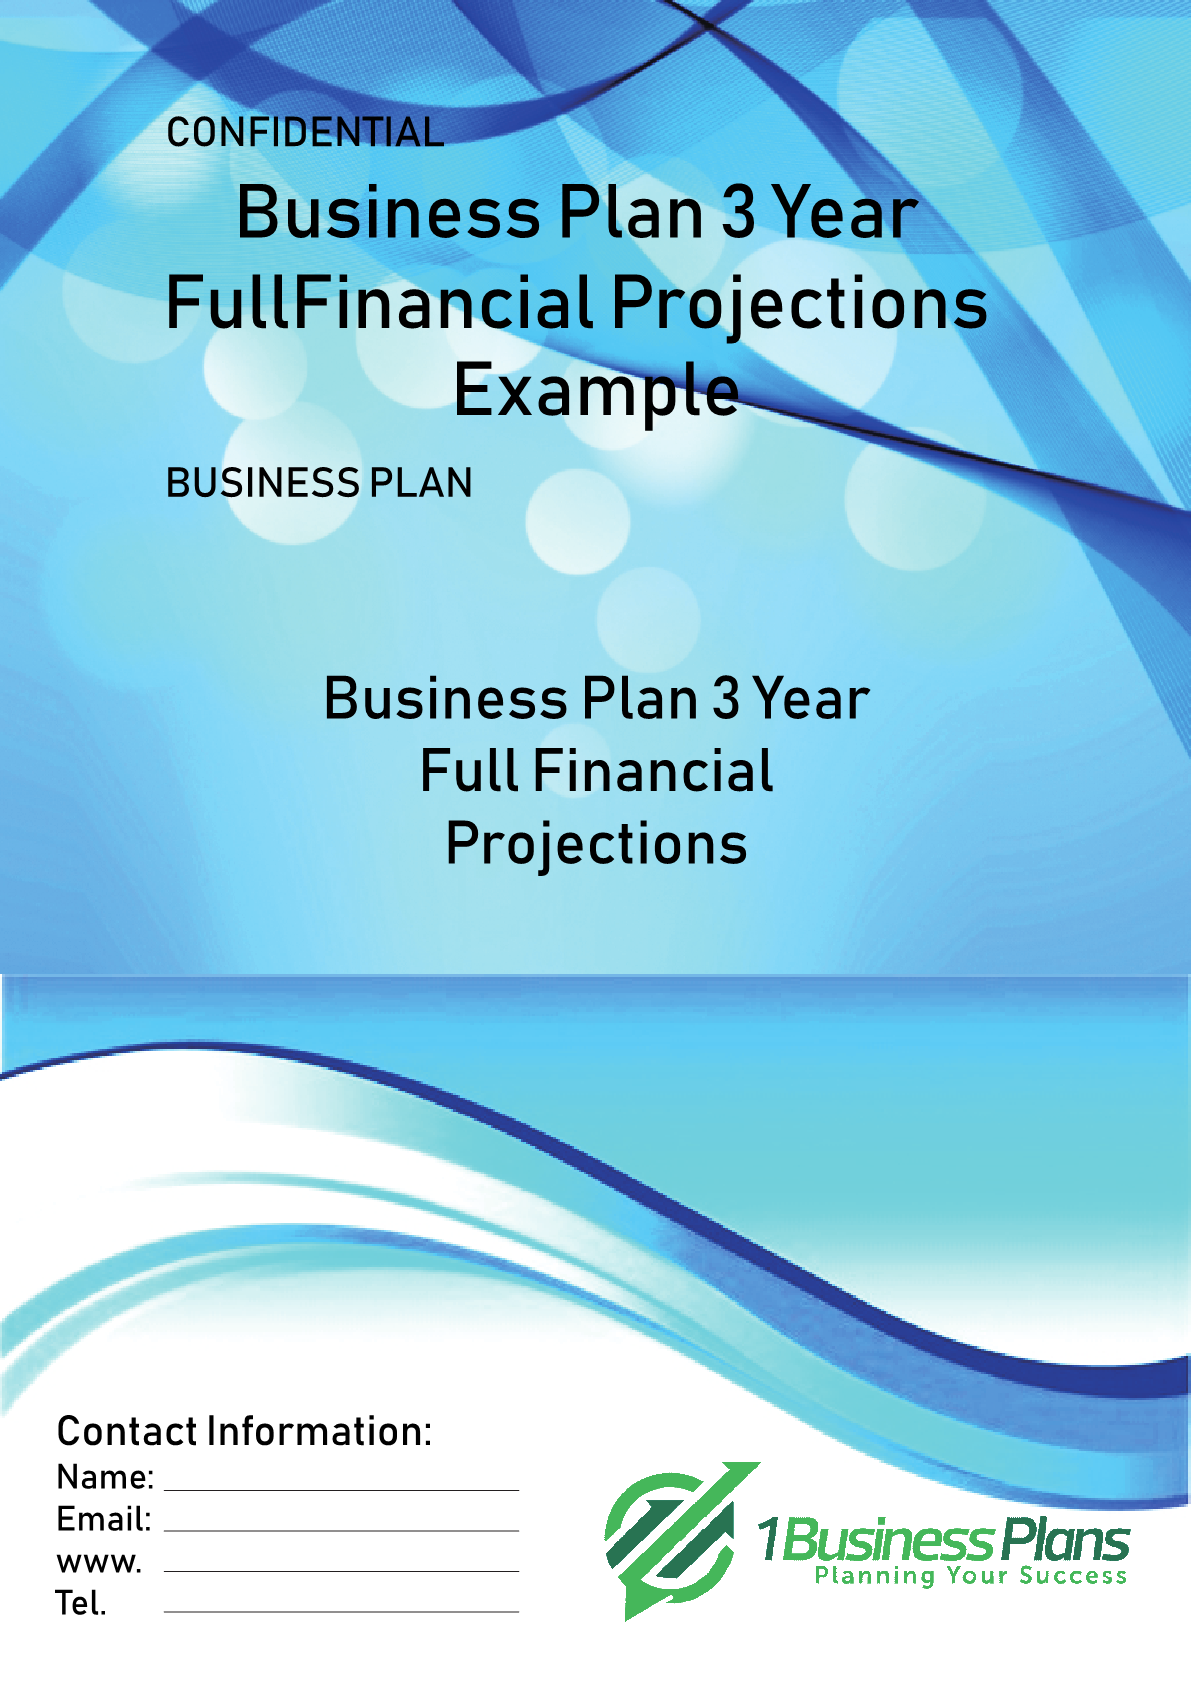 3 year financial projections example